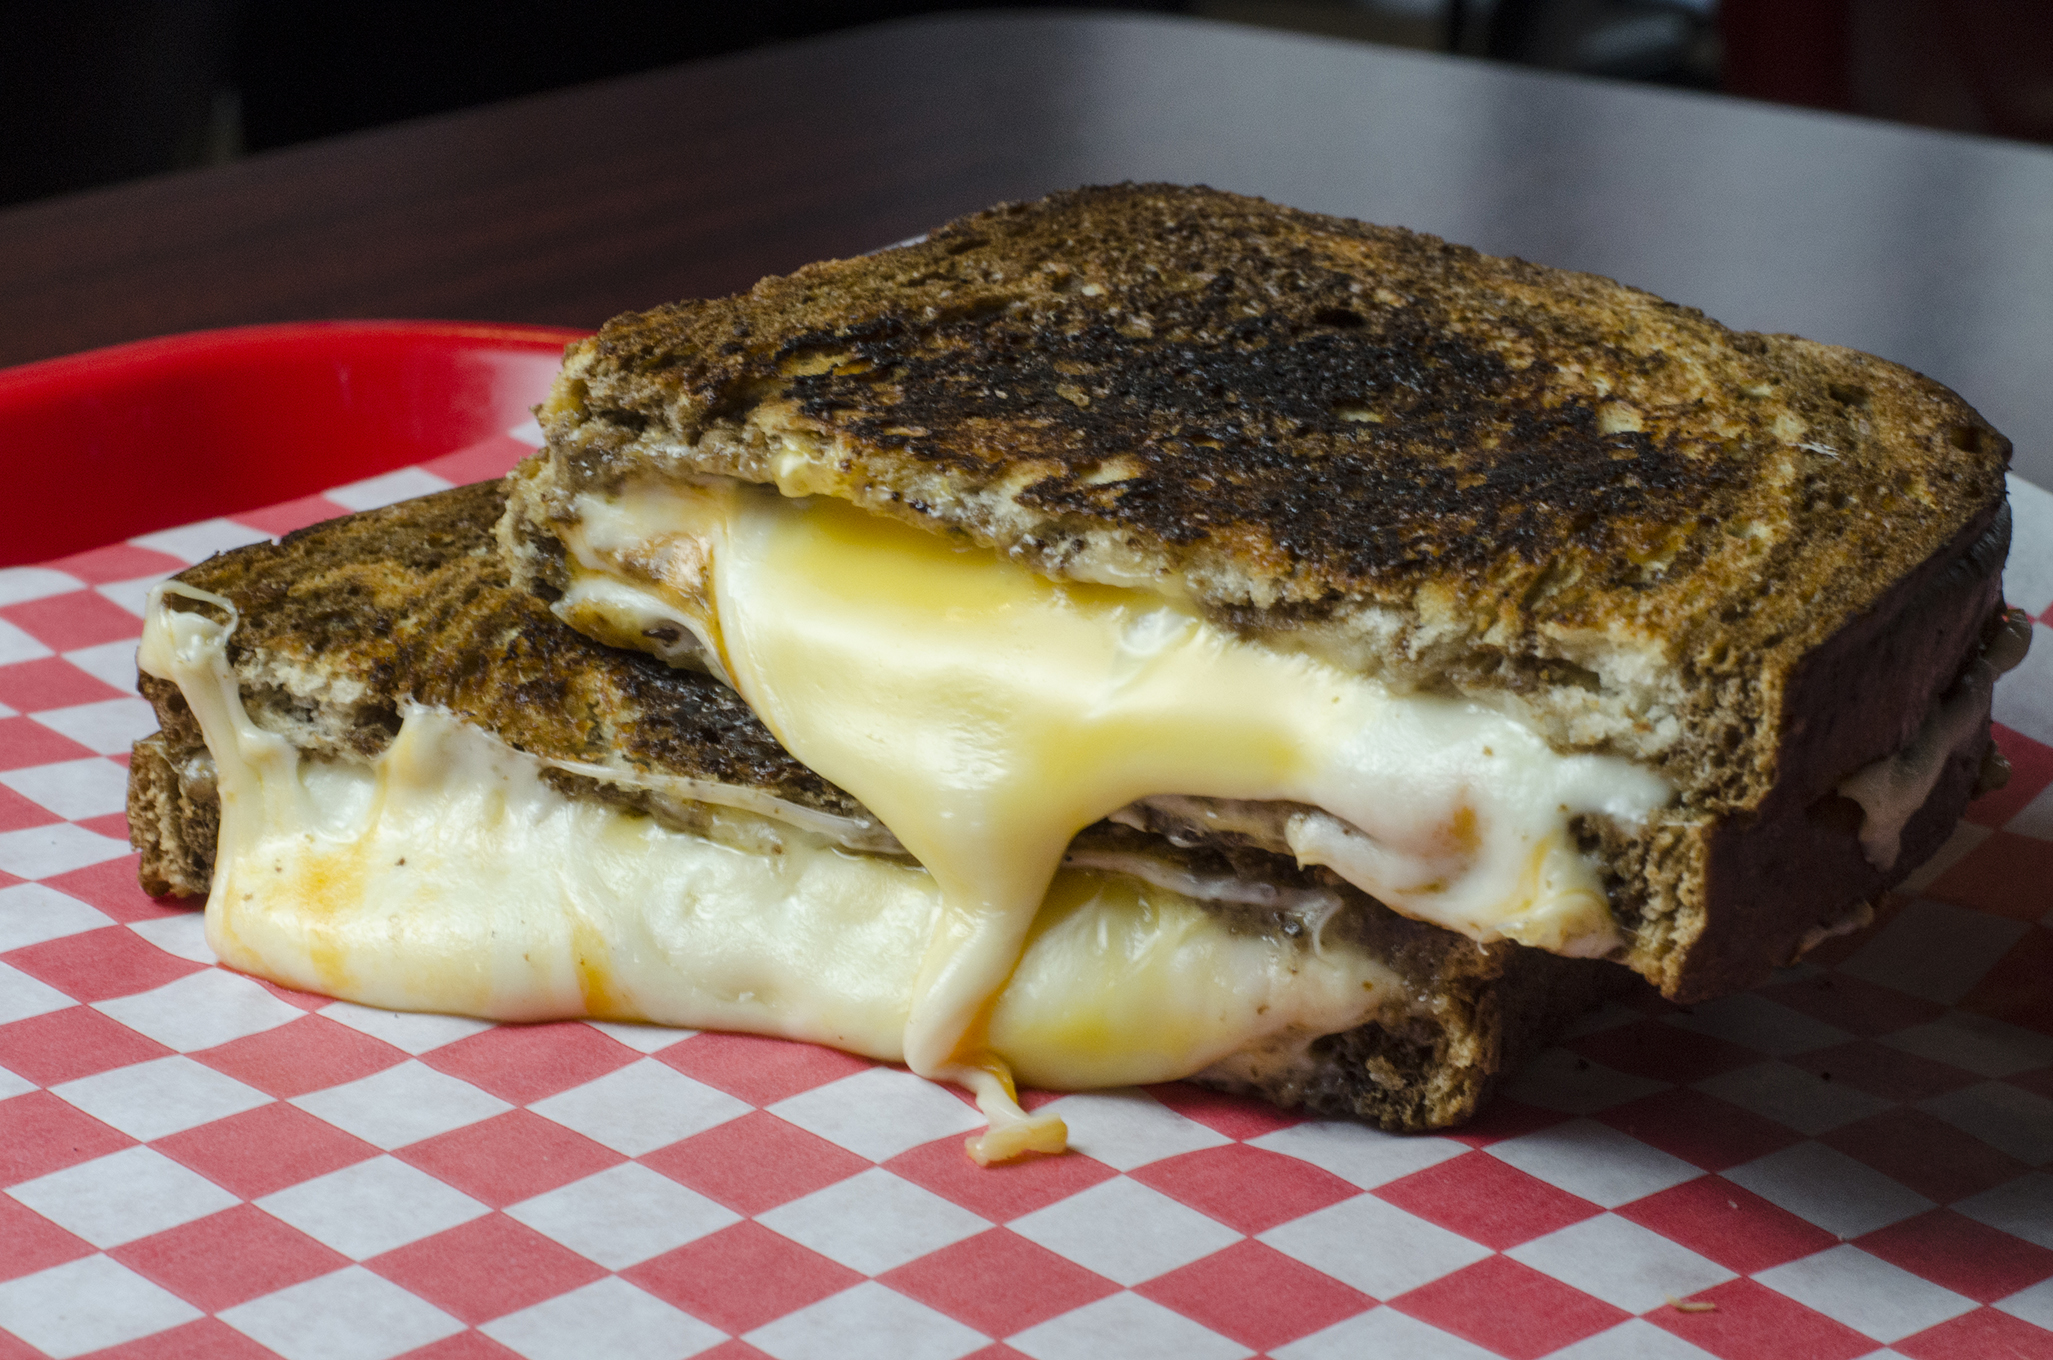 The Original grilled cheese sandwich from Toasty's in downtown Windsor, Ontario.